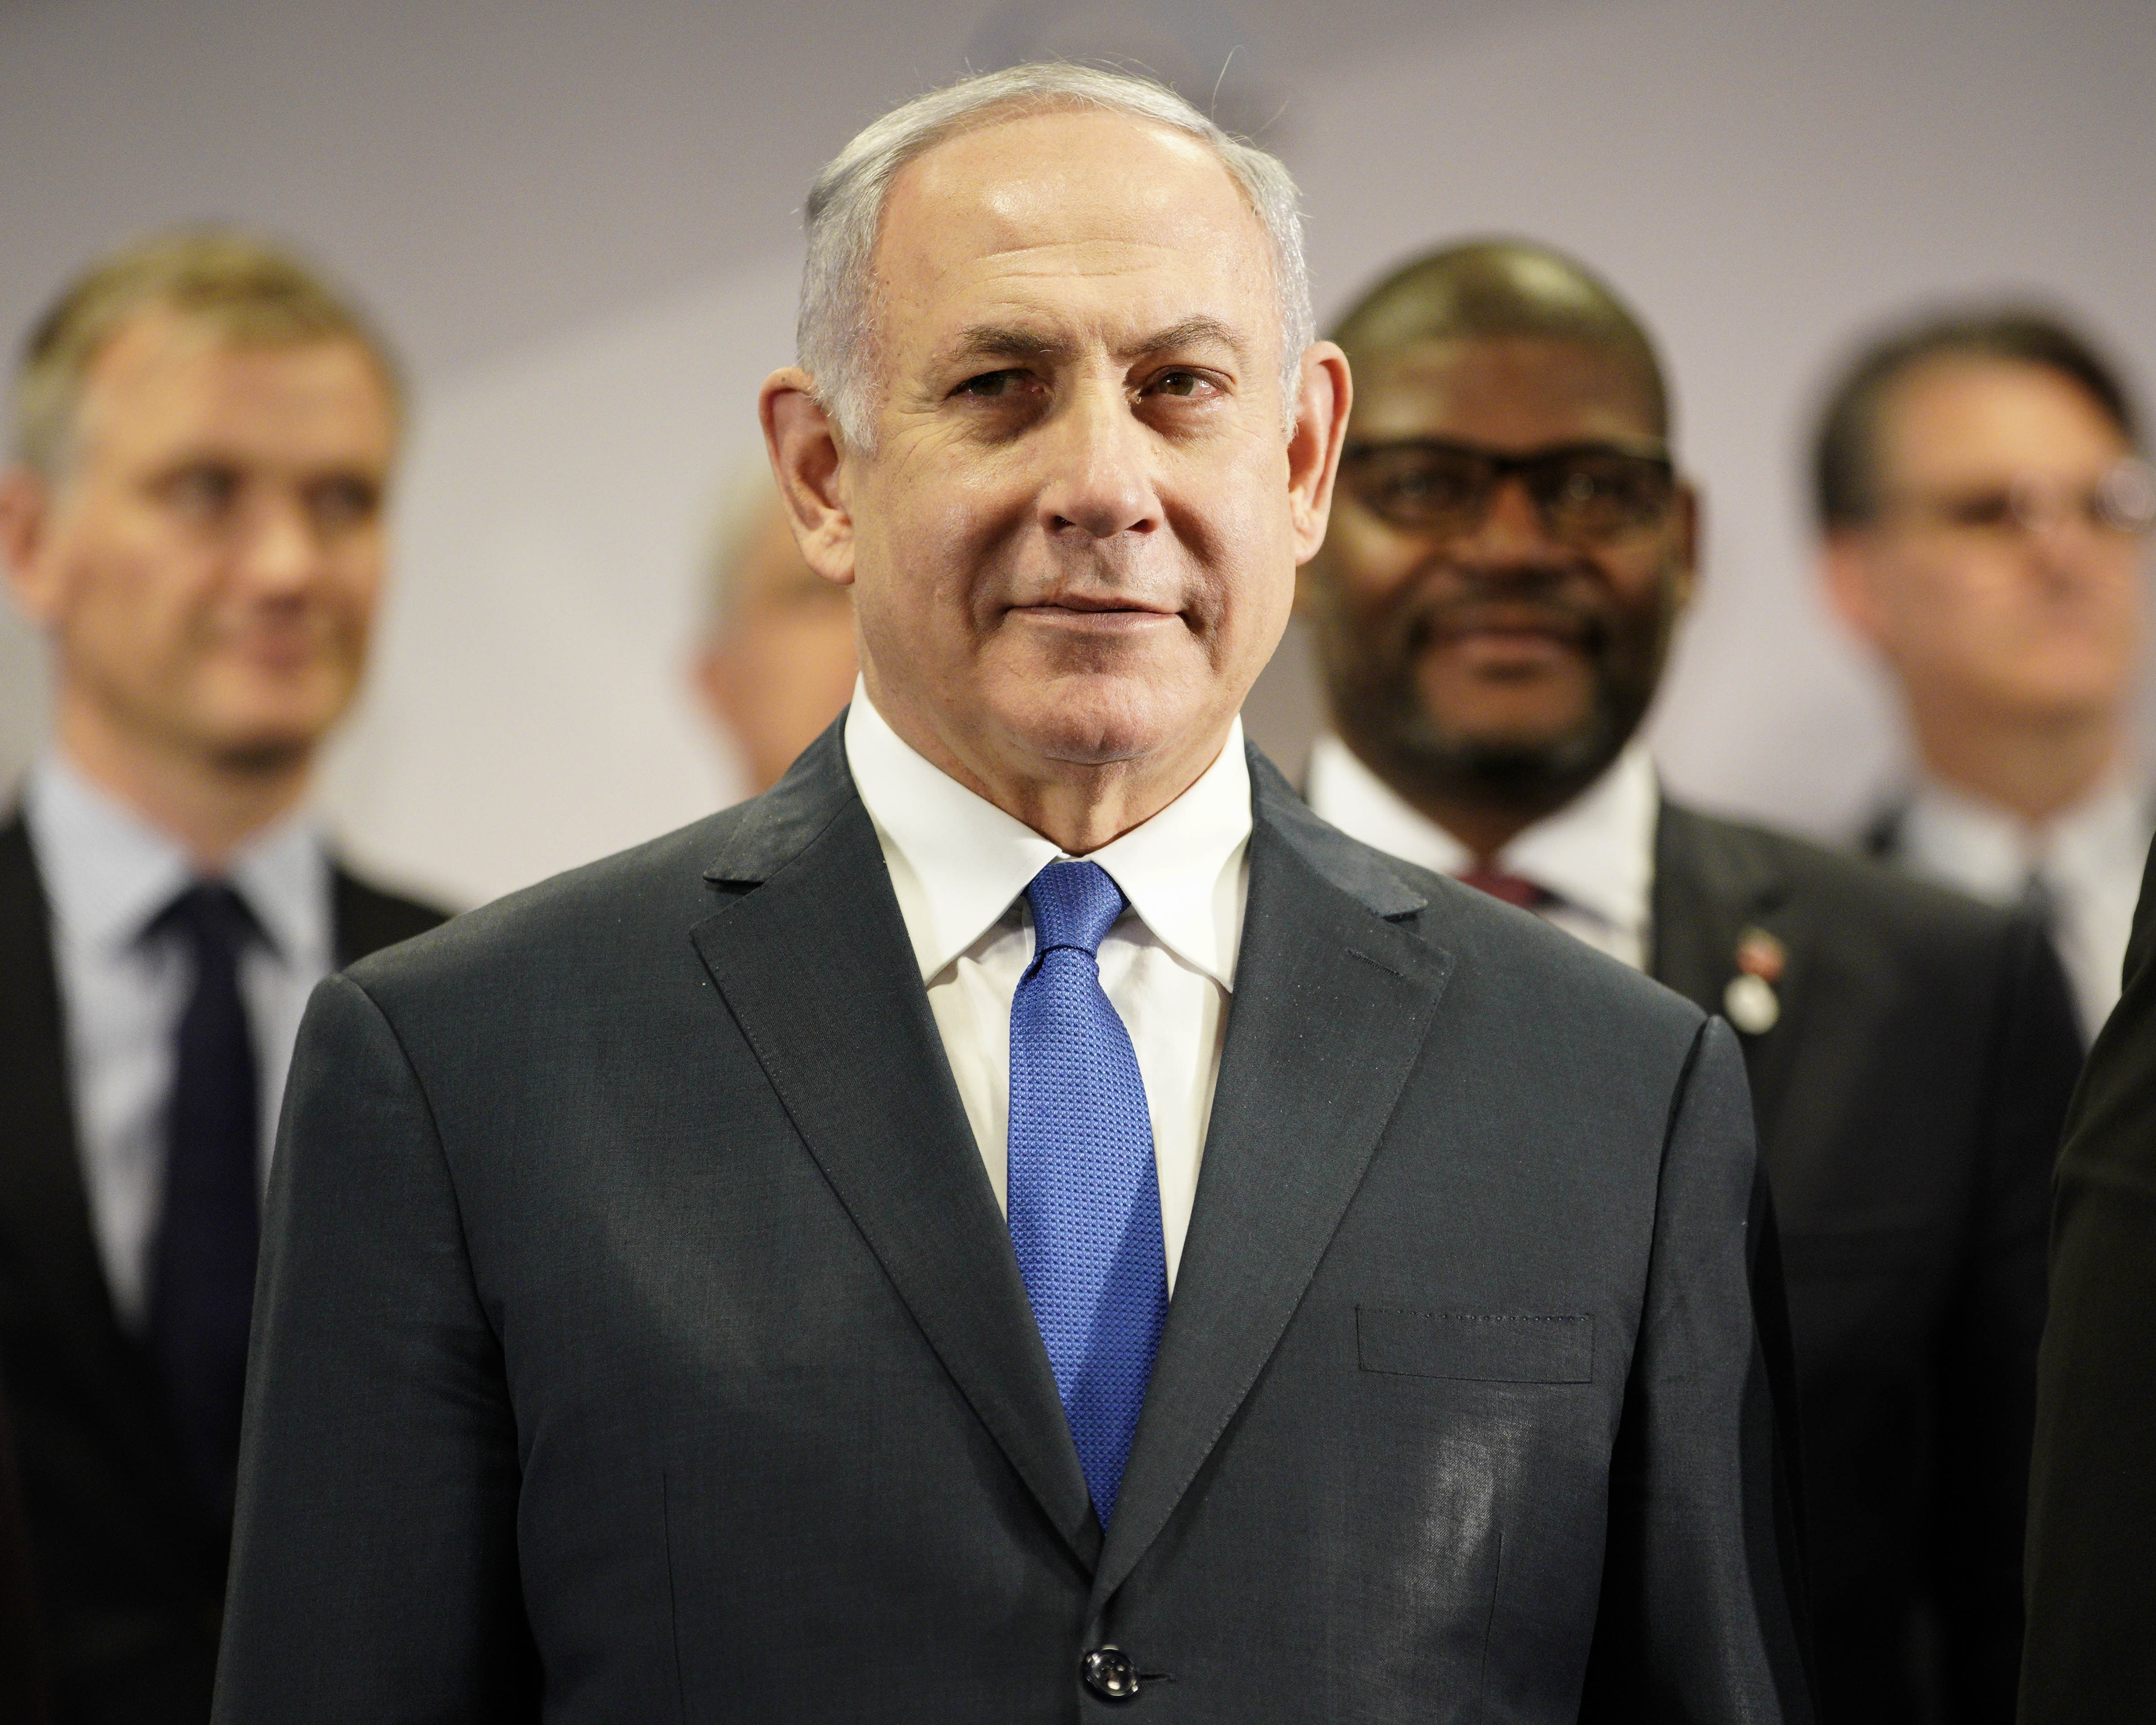 Netanyahu says drops request for immunity from graft charges